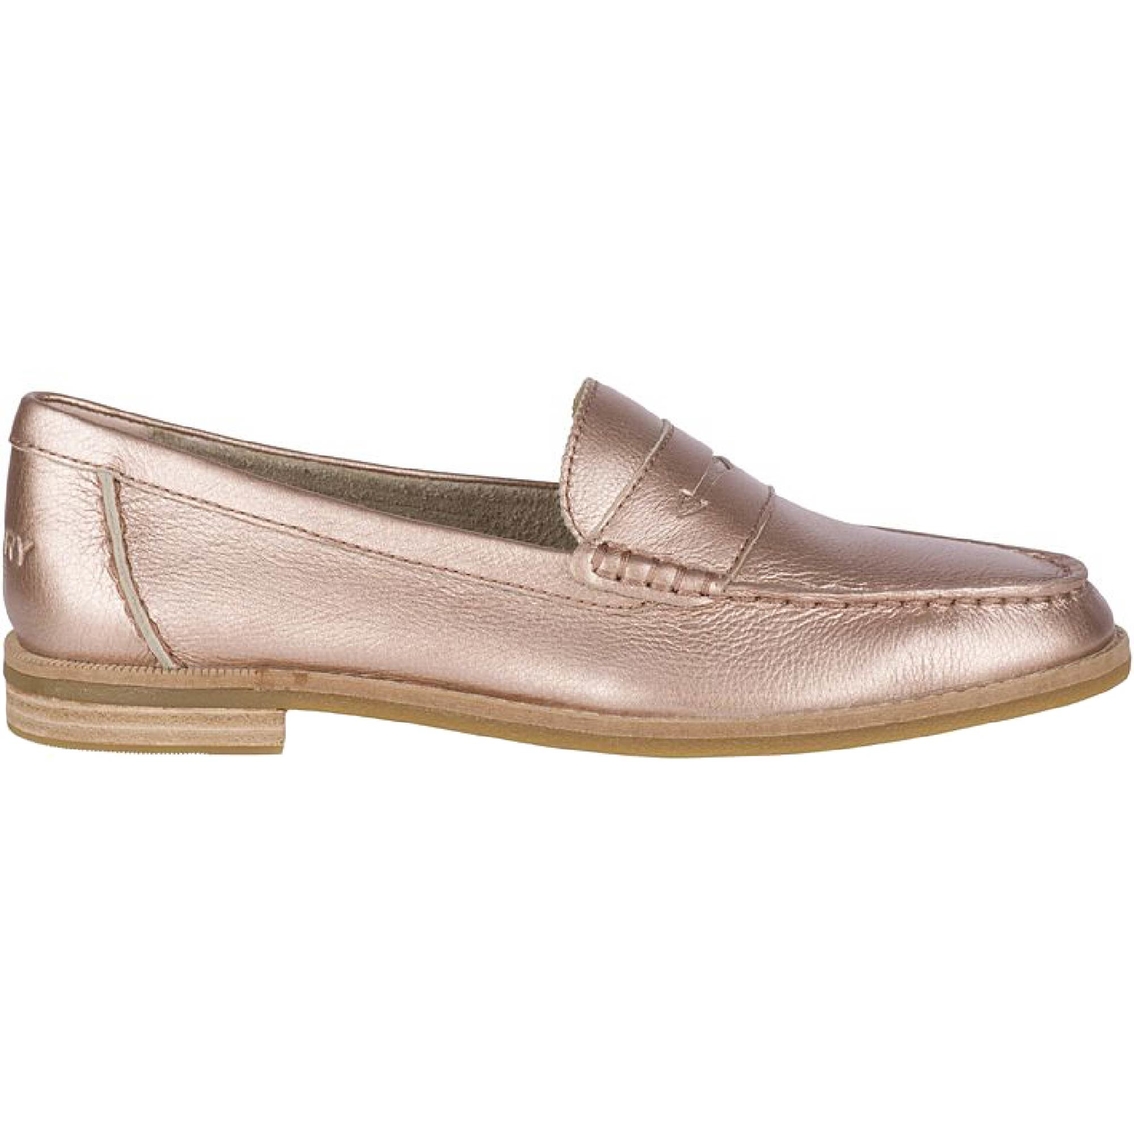 Sperry Women's Seaport Penny Loafers - Image 2 of 6